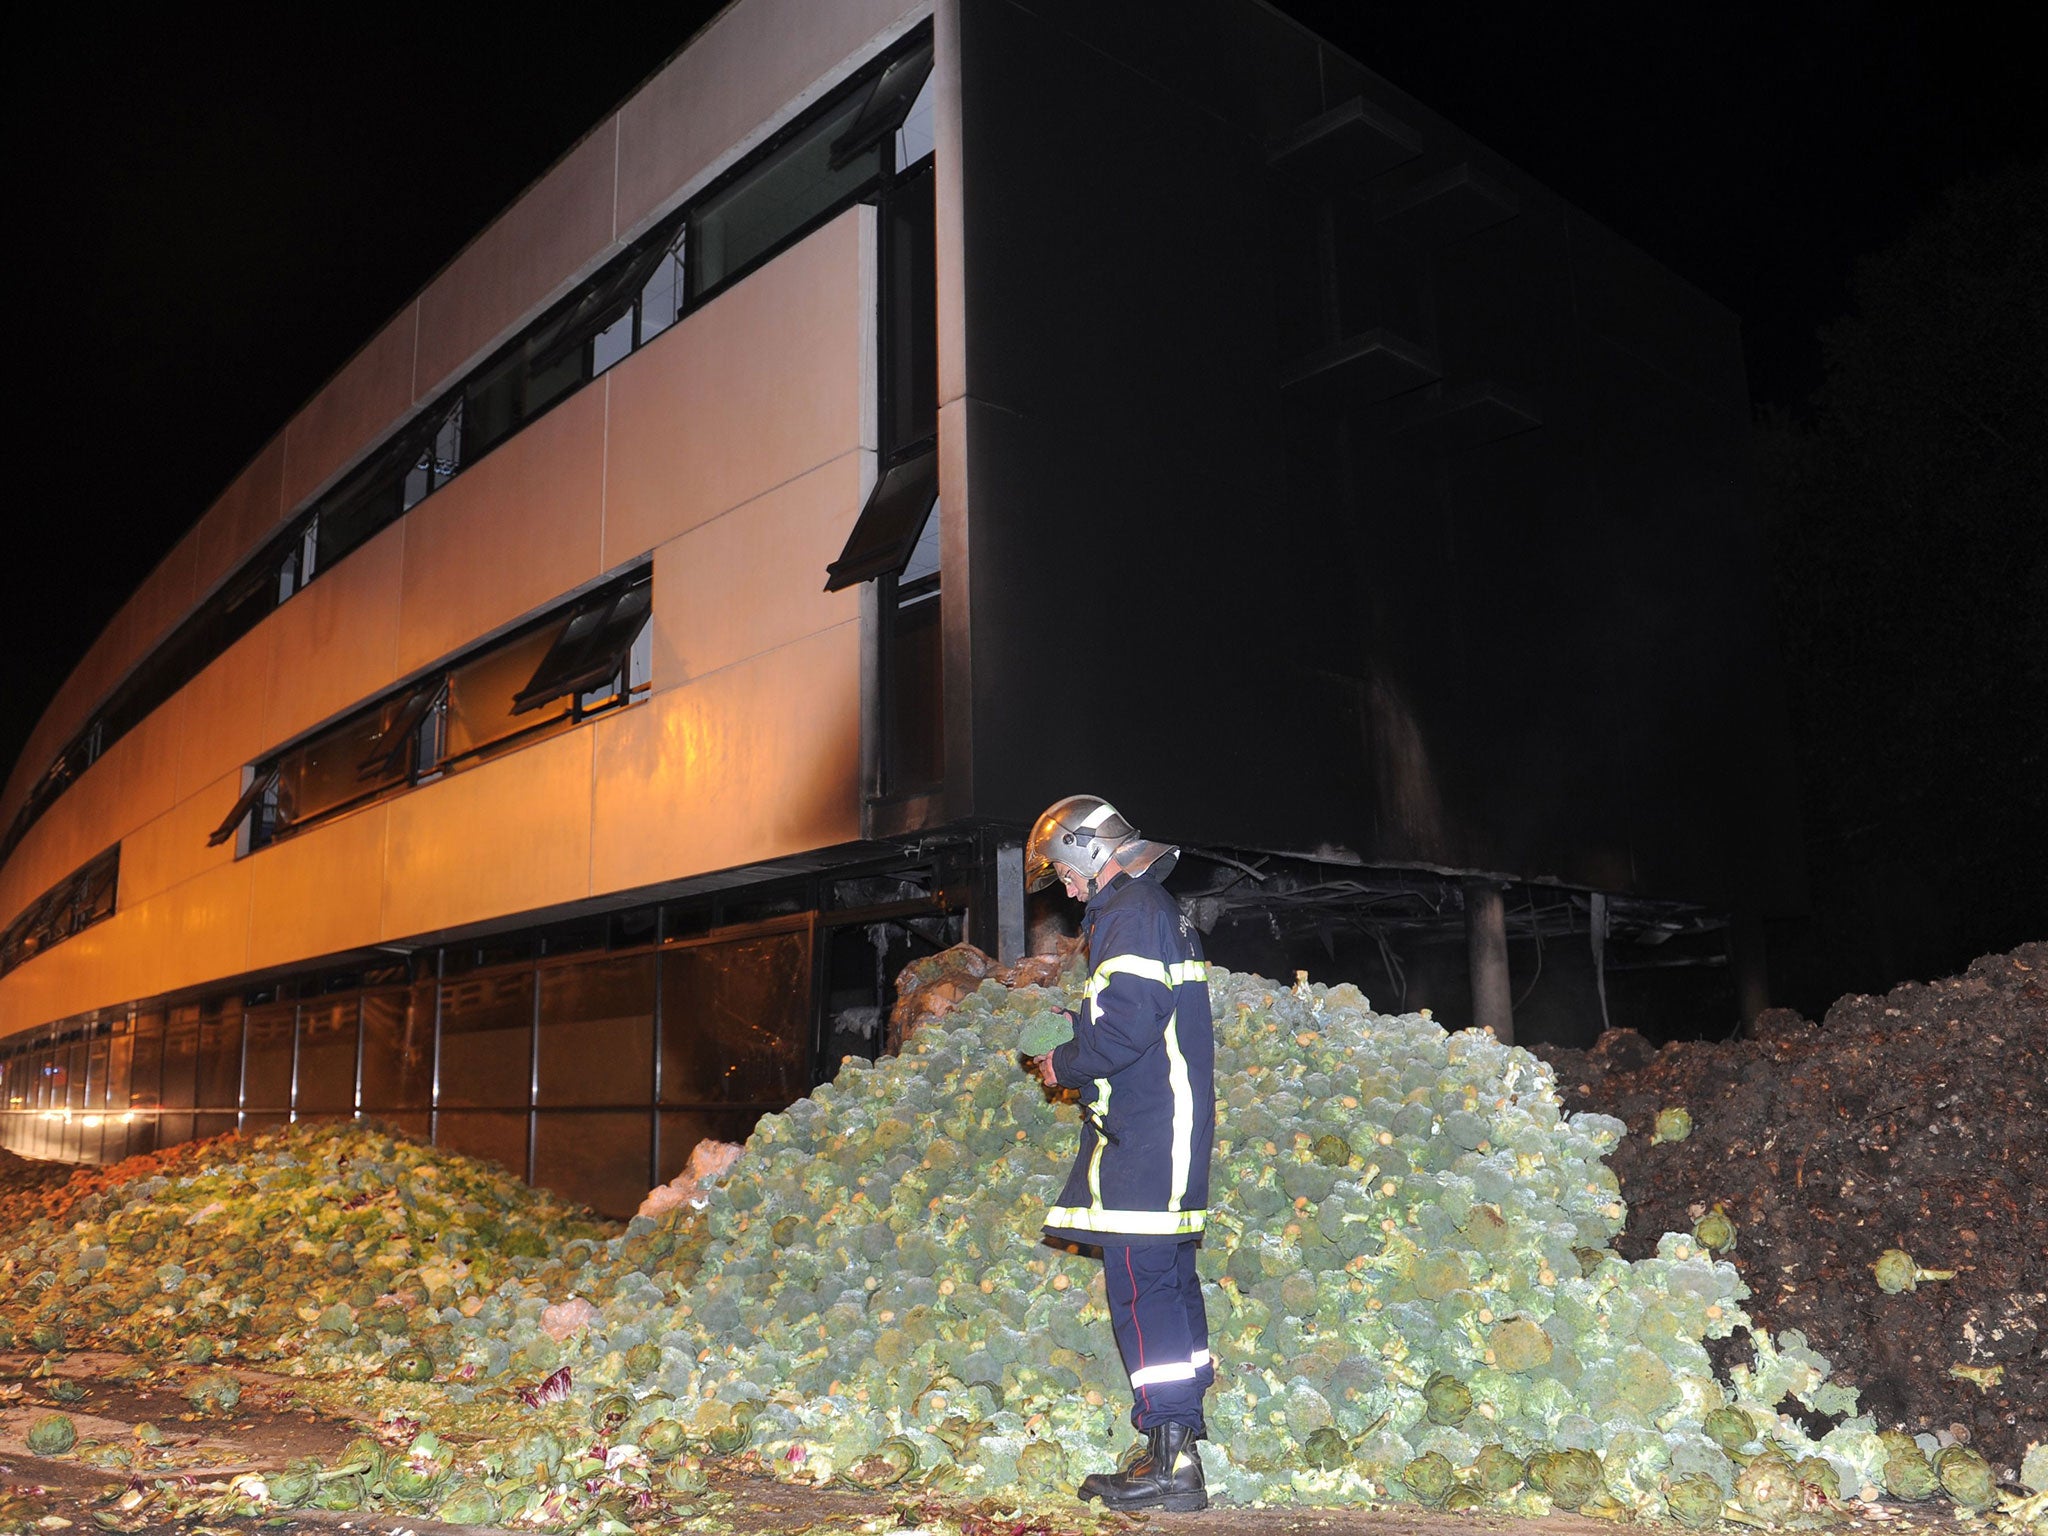 The tax center set fire by angry farmers is seen early September 20, 2014 in Morlaix, western France.